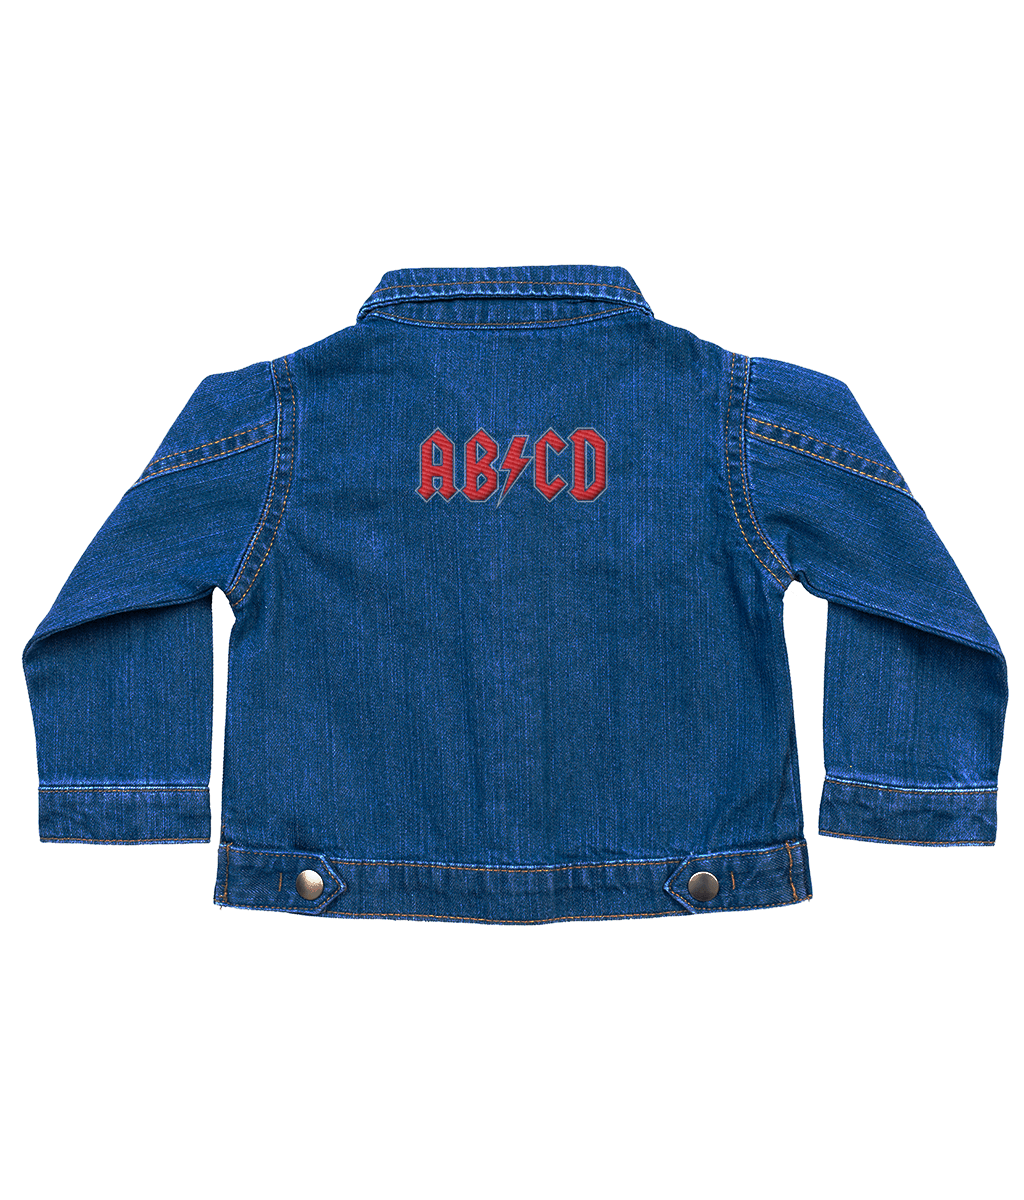 Organic Cotton Embroidered Denim Jacket, ABCD Skool is OUT!